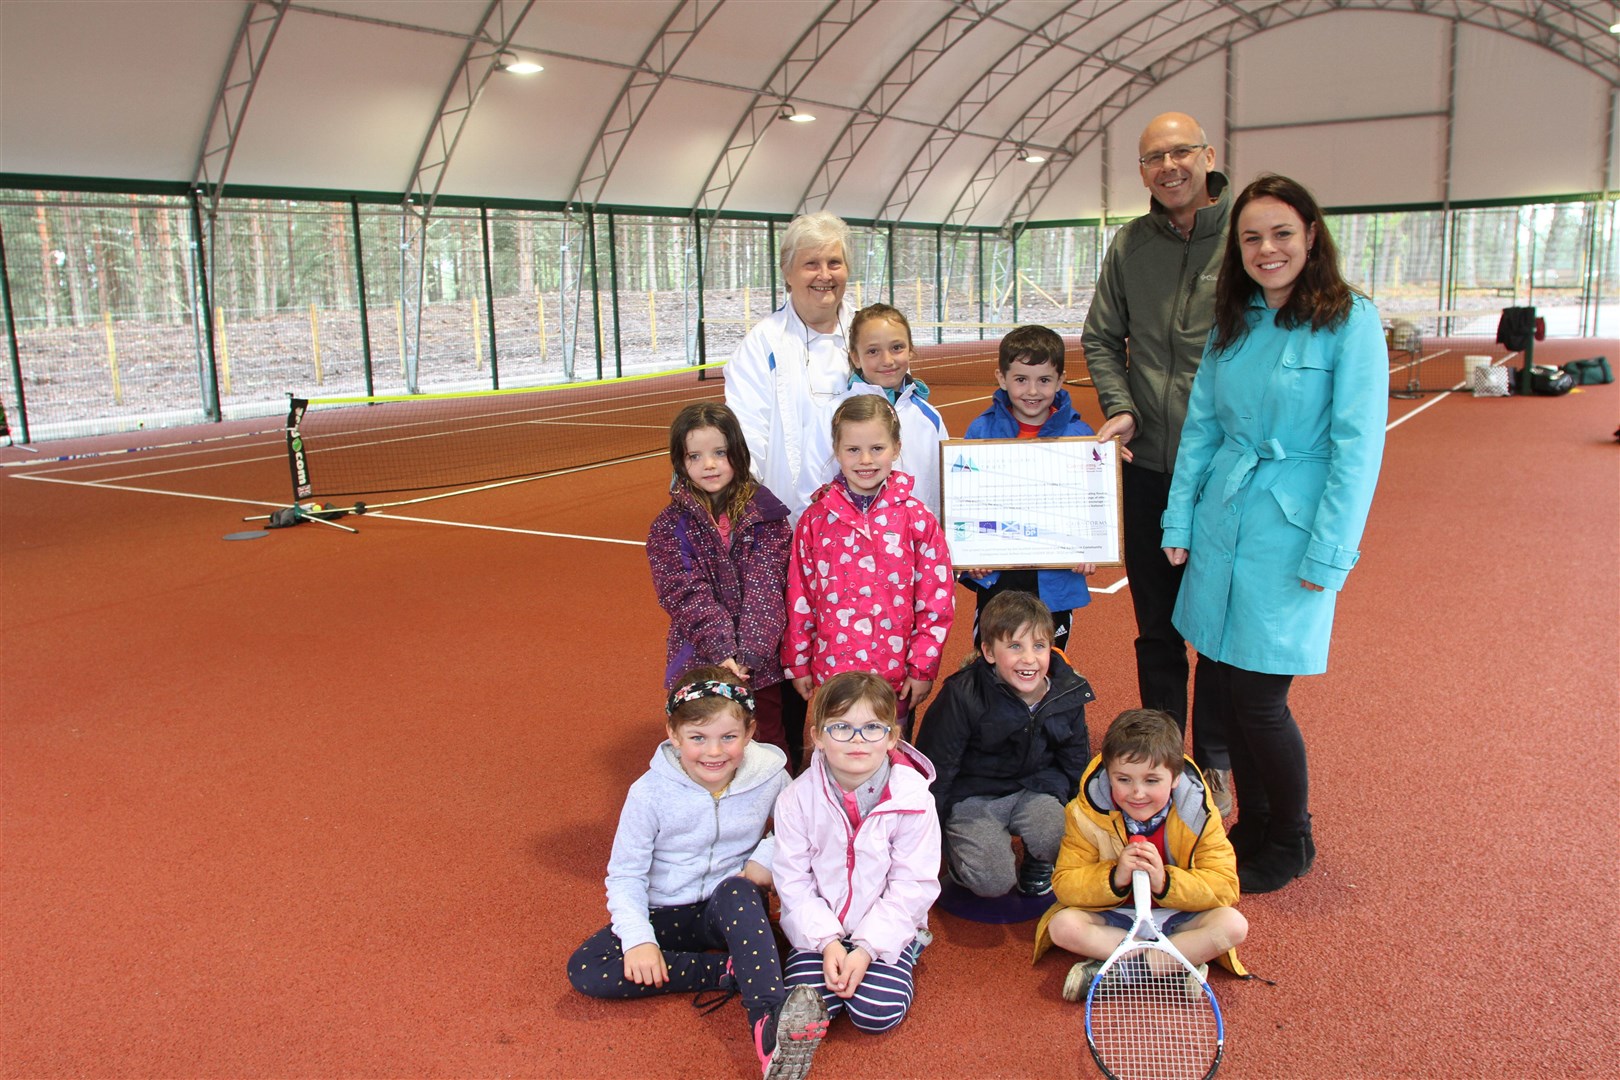 Davie Cameron, from Cairngorms Leader, Kate Forbes, Yvonne Birnie and some of the young tennis players who will benefit from the new court.